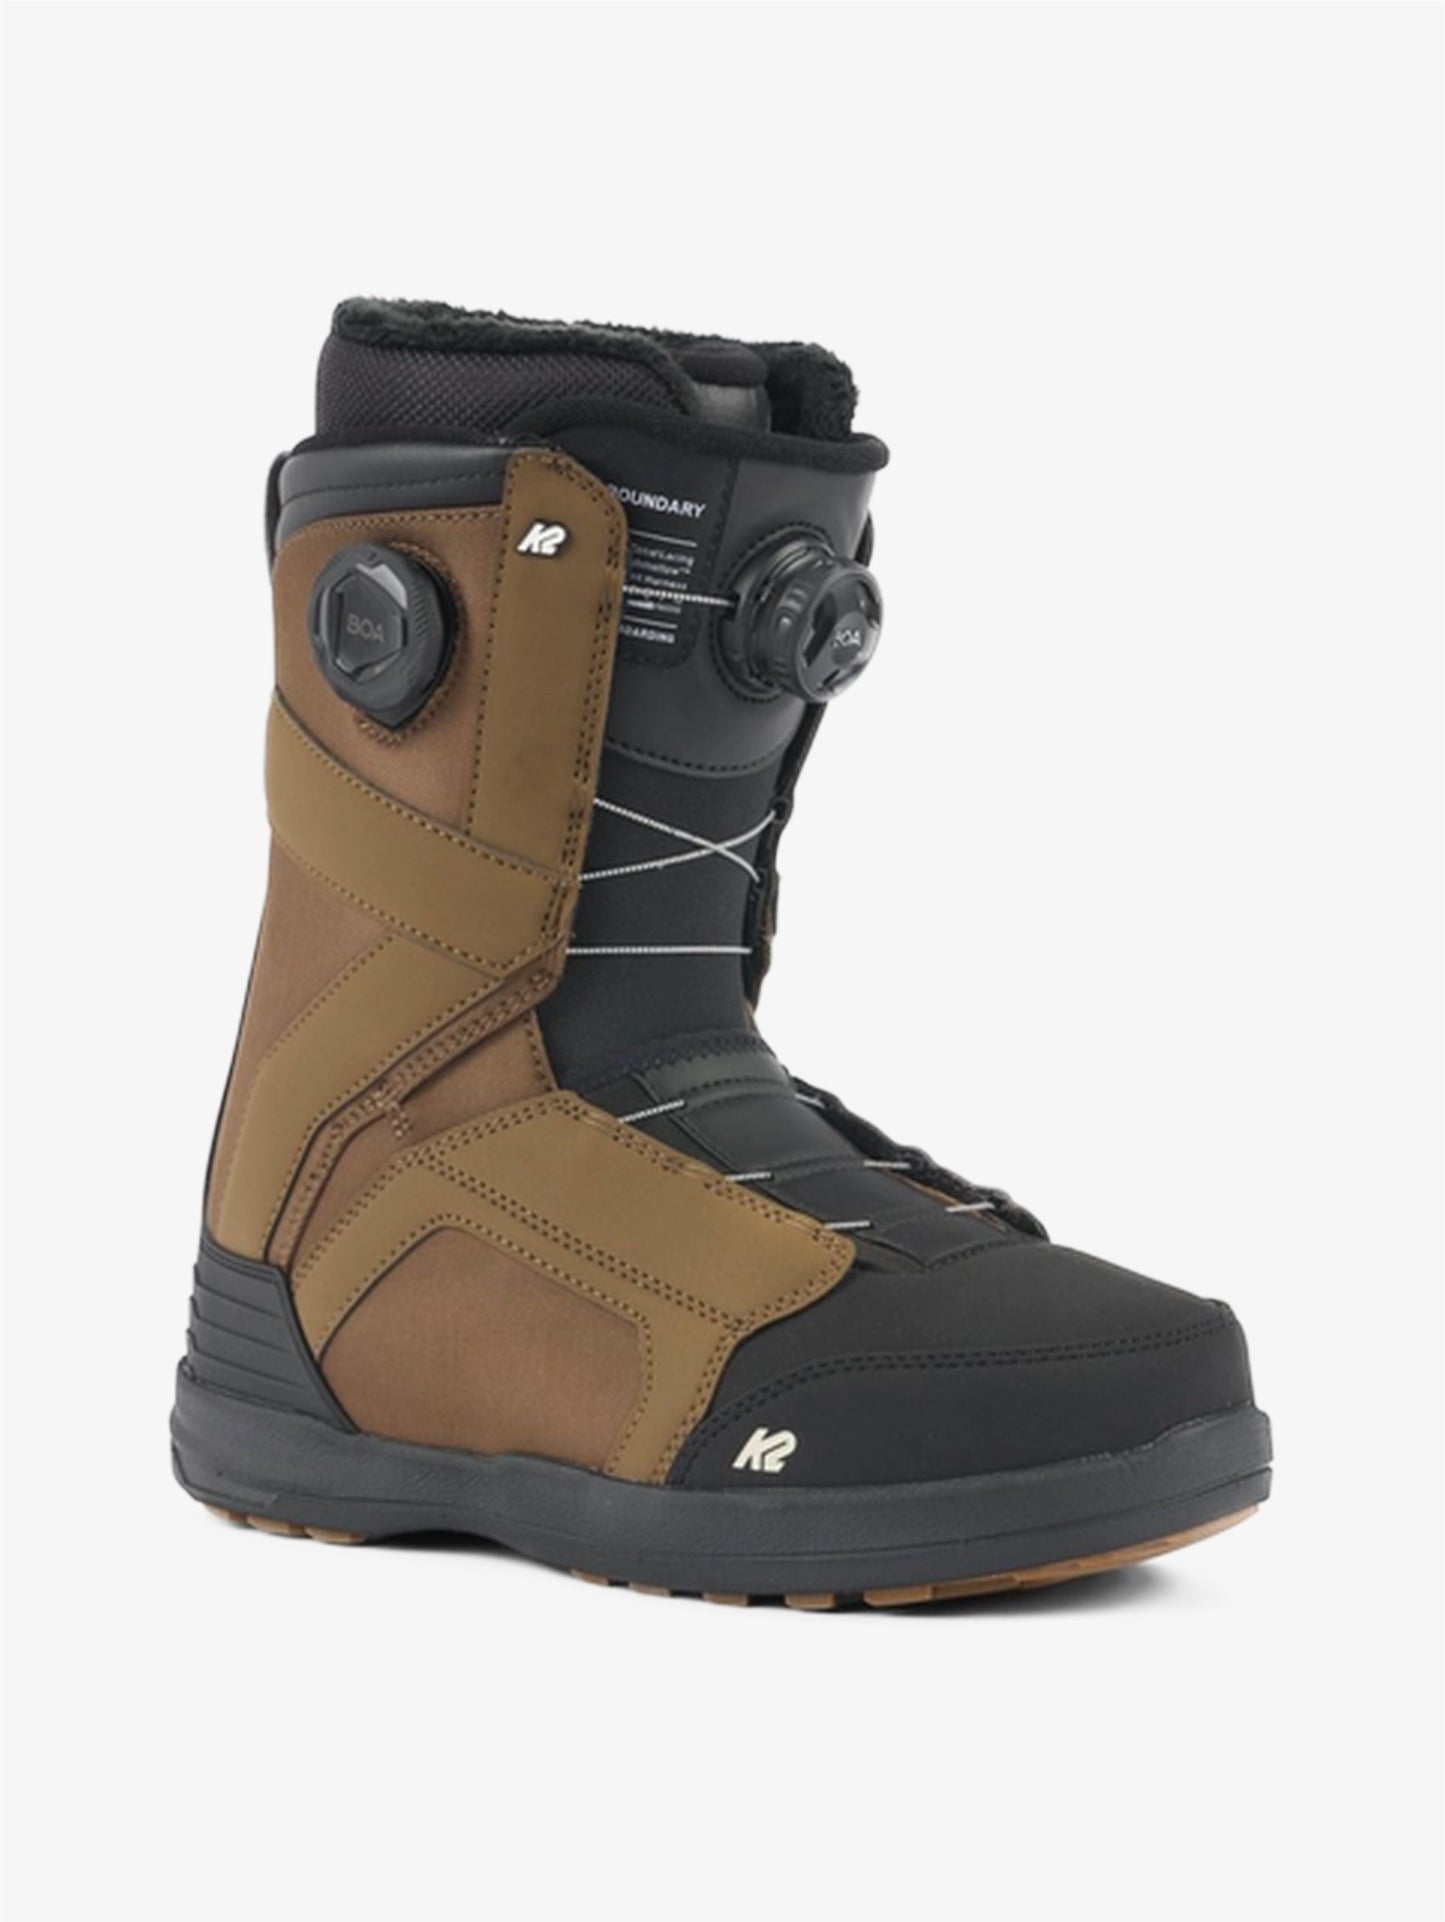 Boundary men's snowboard boots brown